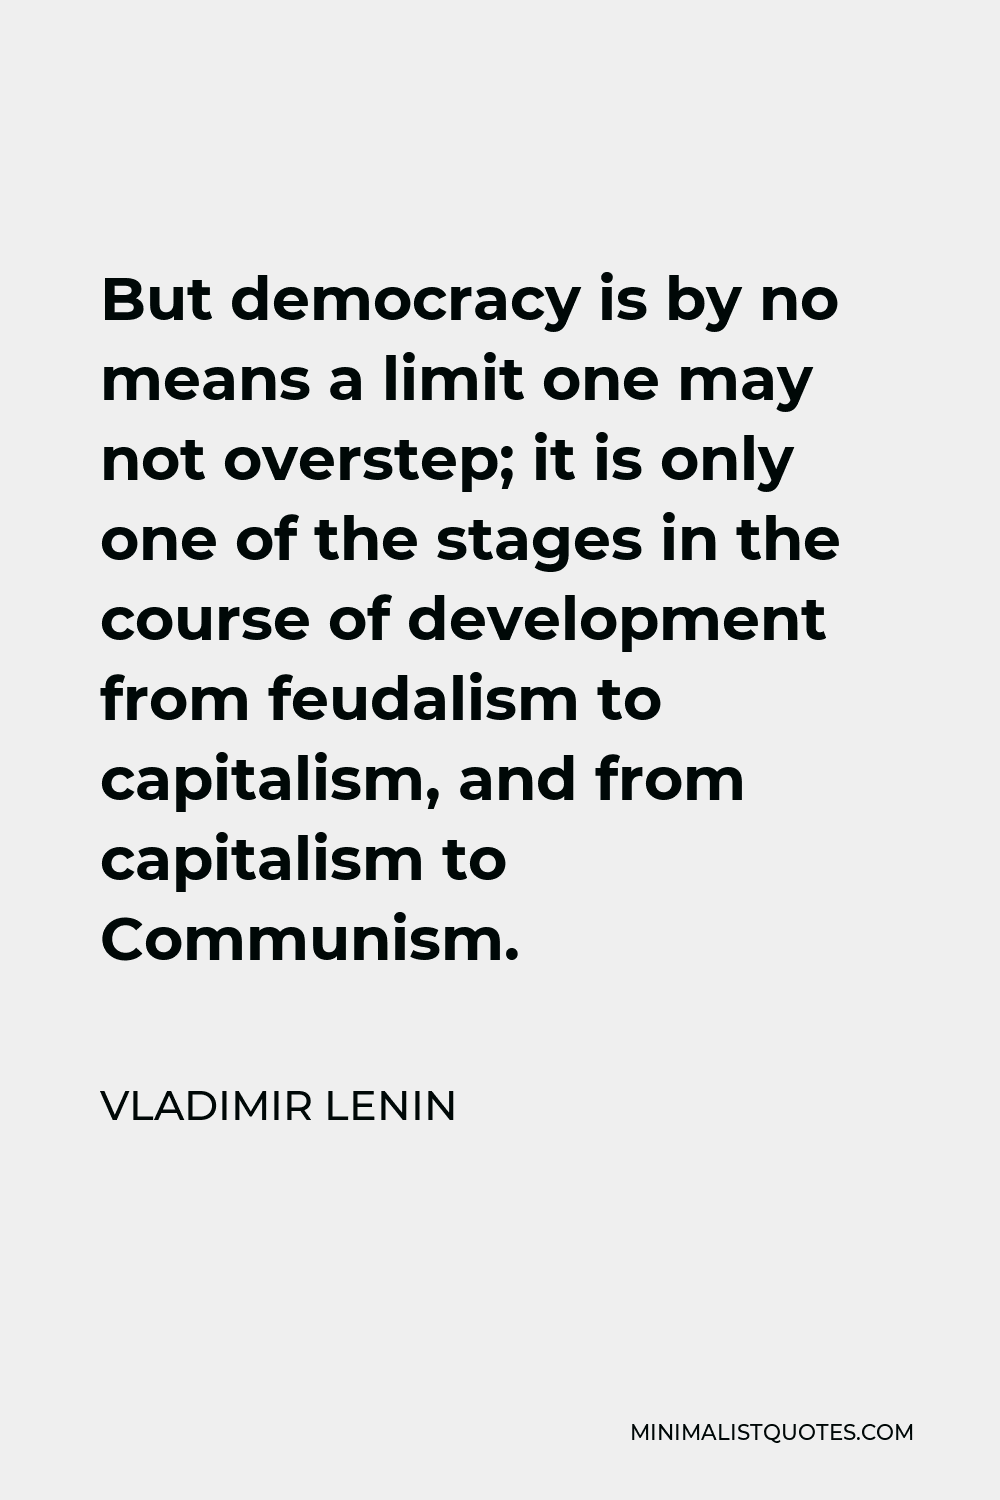 Vladimir Lenin Quote - But democracy is by no means a limit one may not overstep; it is only one of the stages in the course of development from feudalism to capitalism, and from capitalism to Communism.